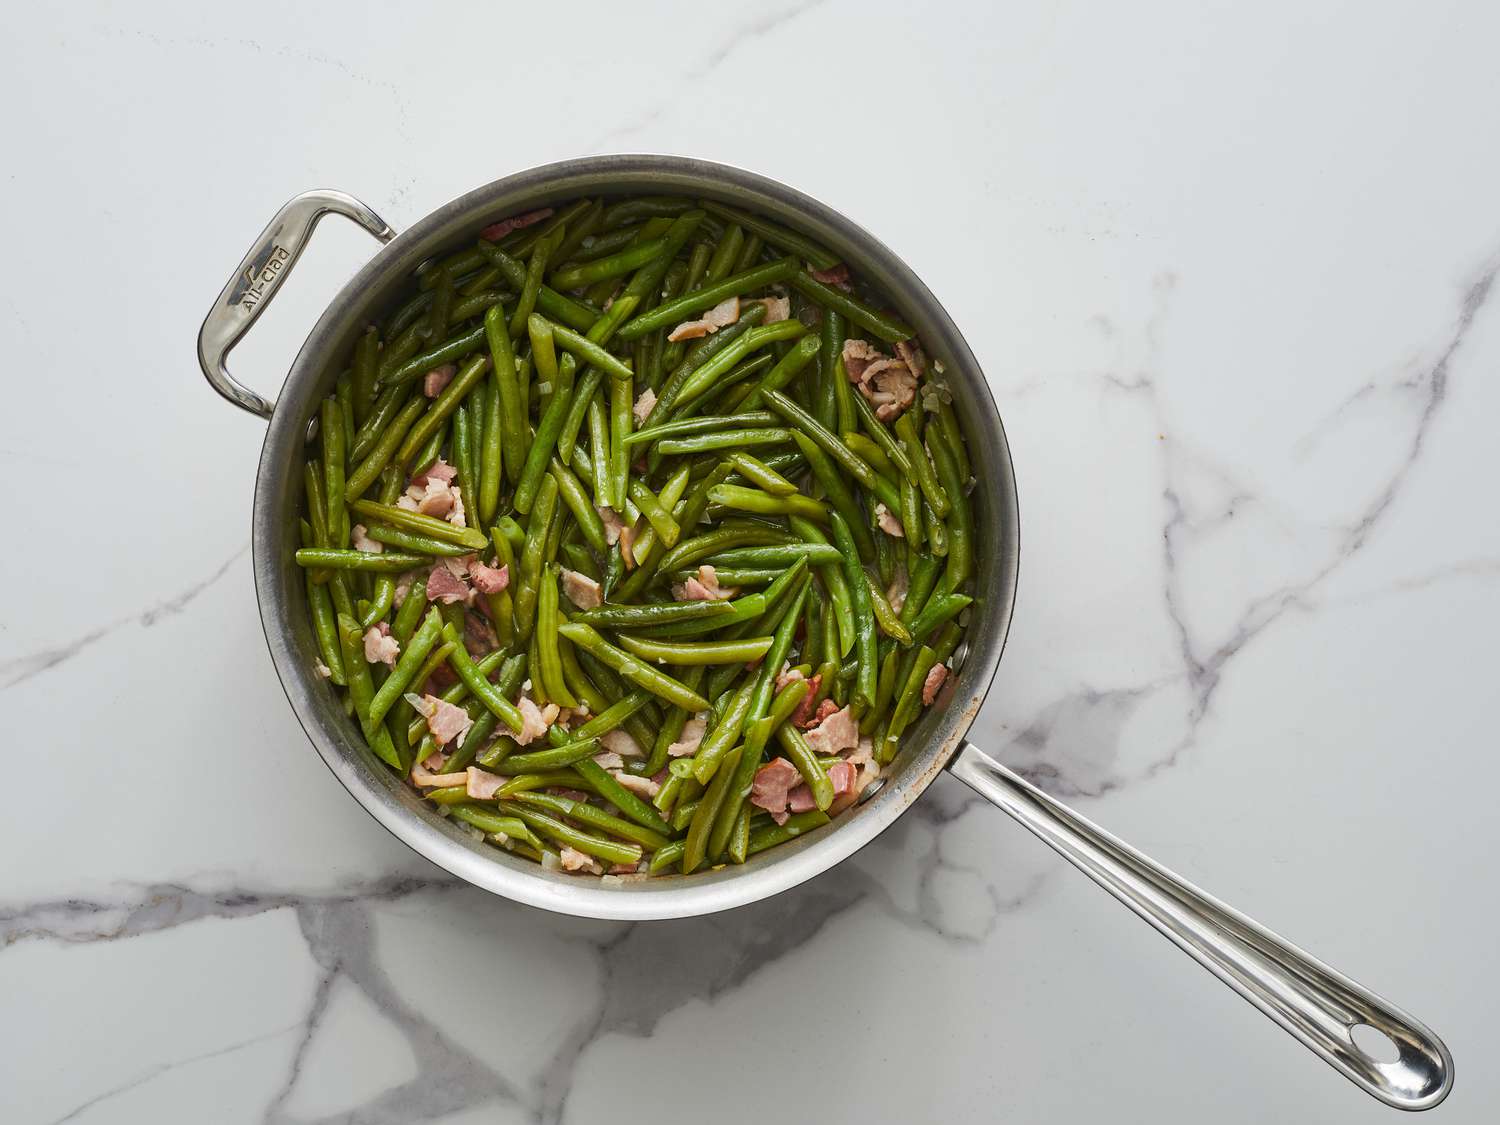 The Ultimate Canned Green Beans Hack!